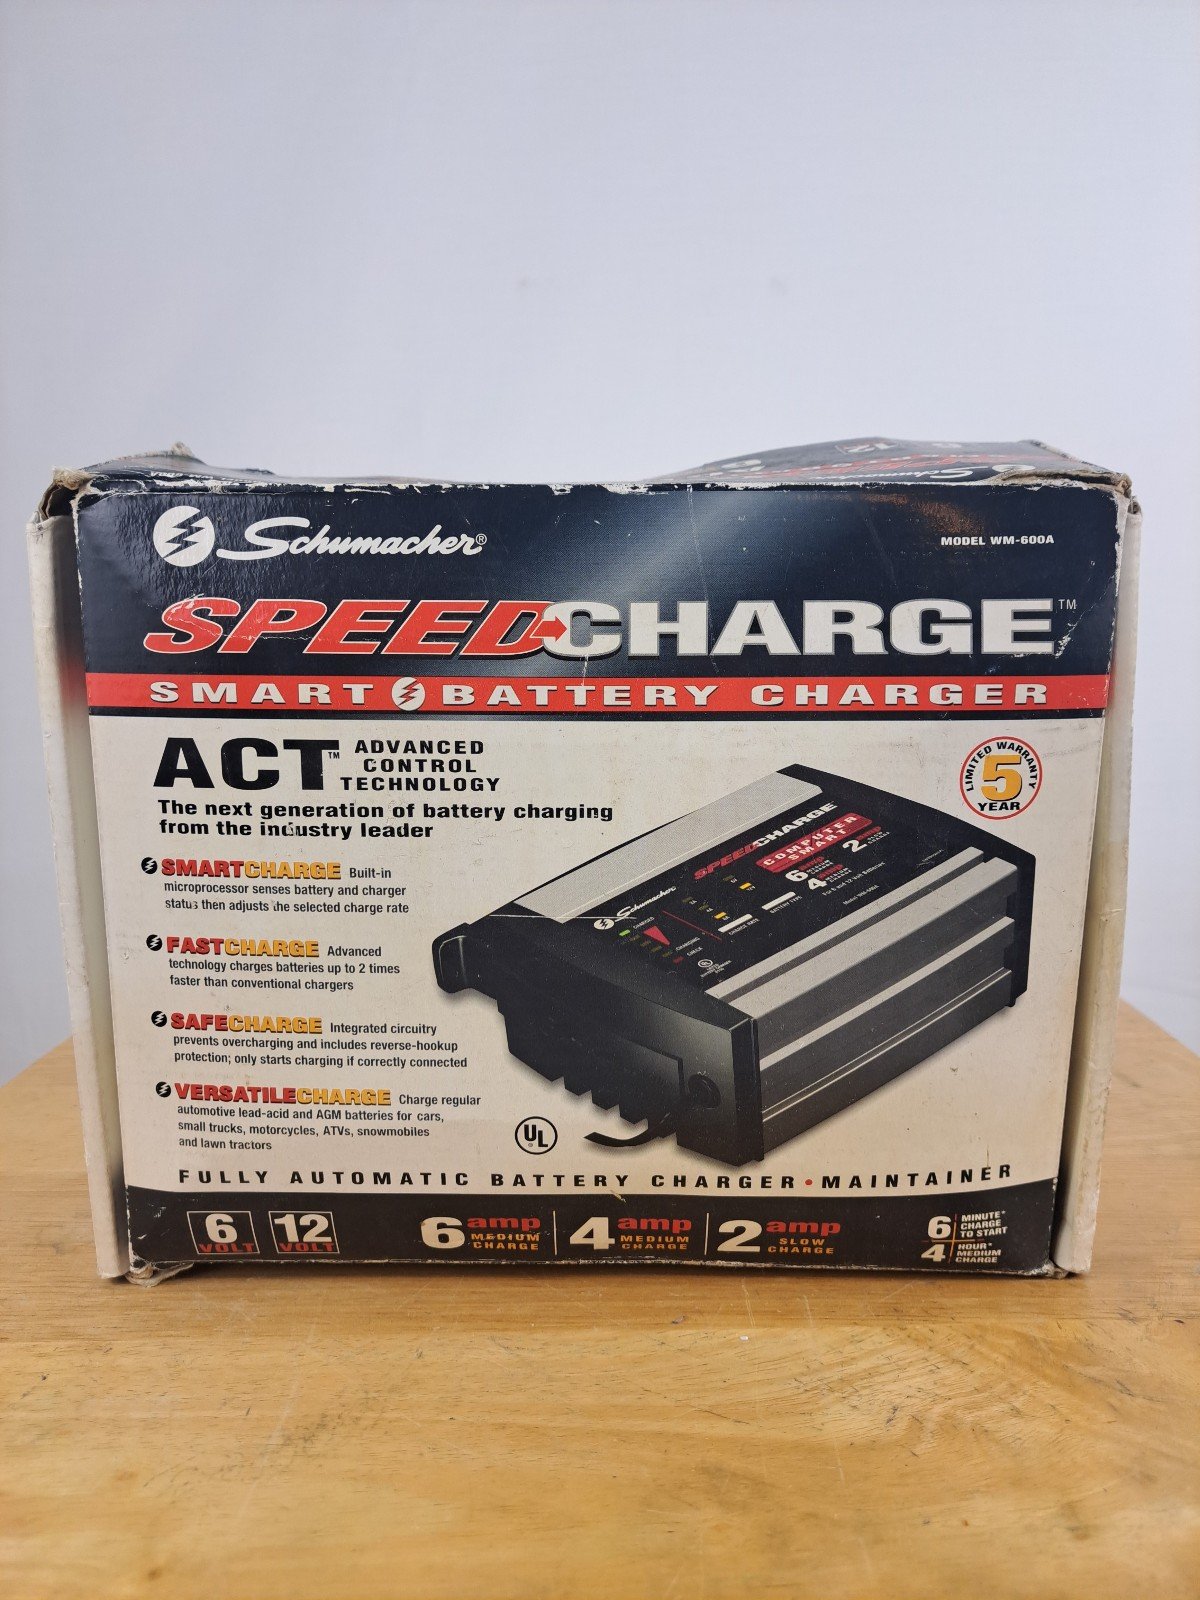 Schumaker Speed Charge smart battery charger for 6 & 12